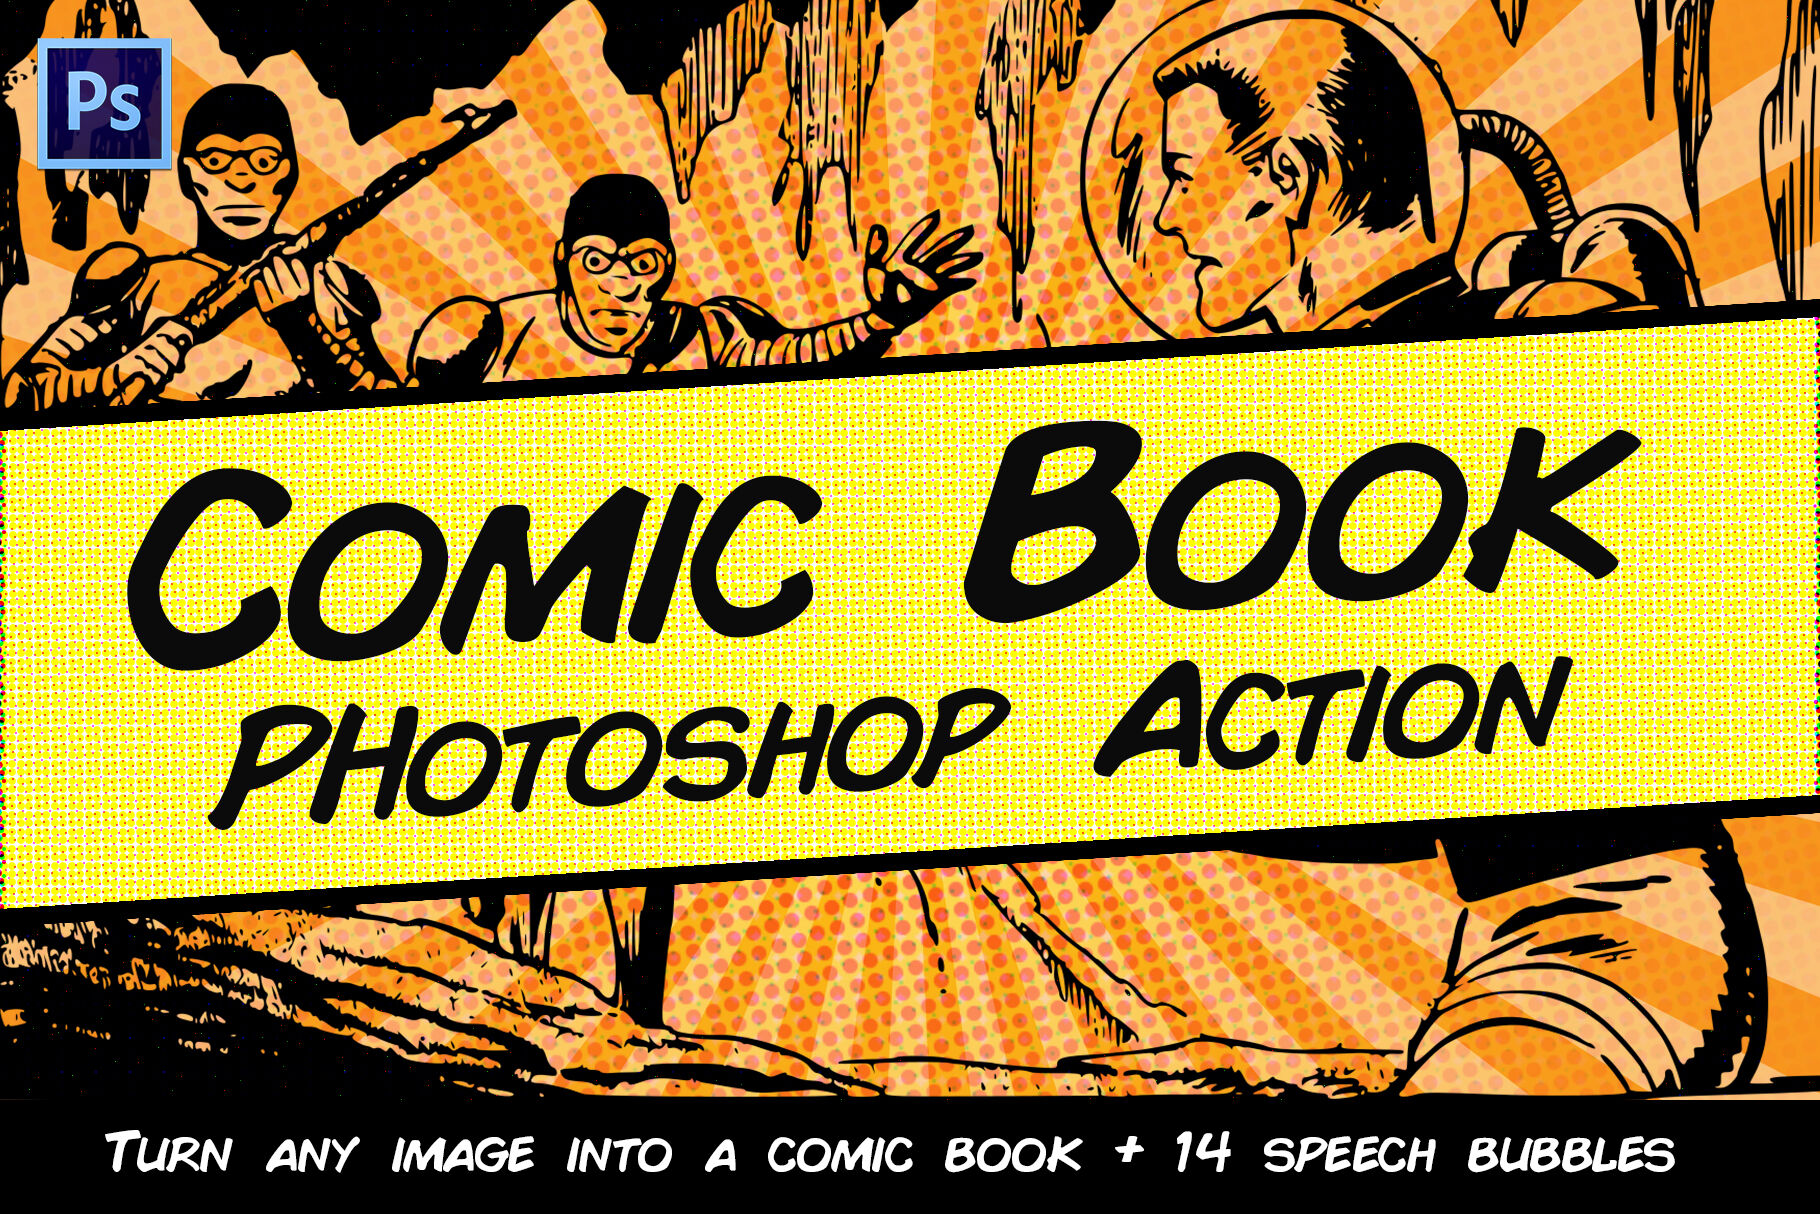 comic book action photoshop download